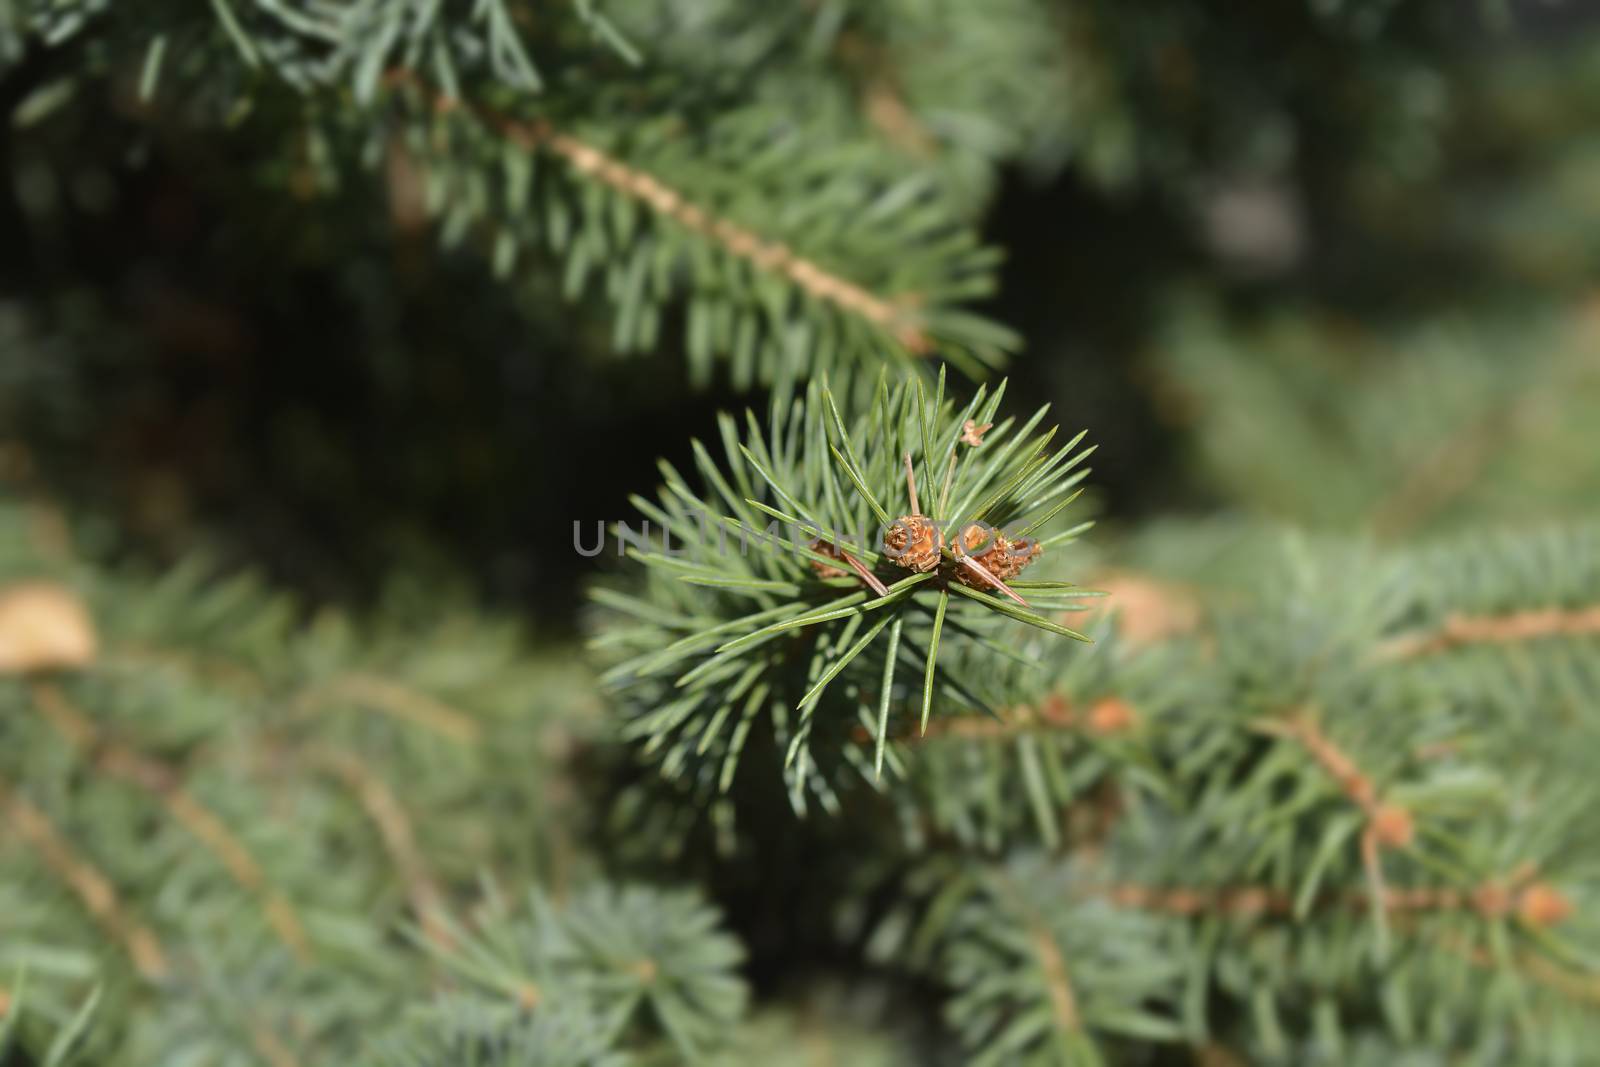 Norway spruce by nahhan